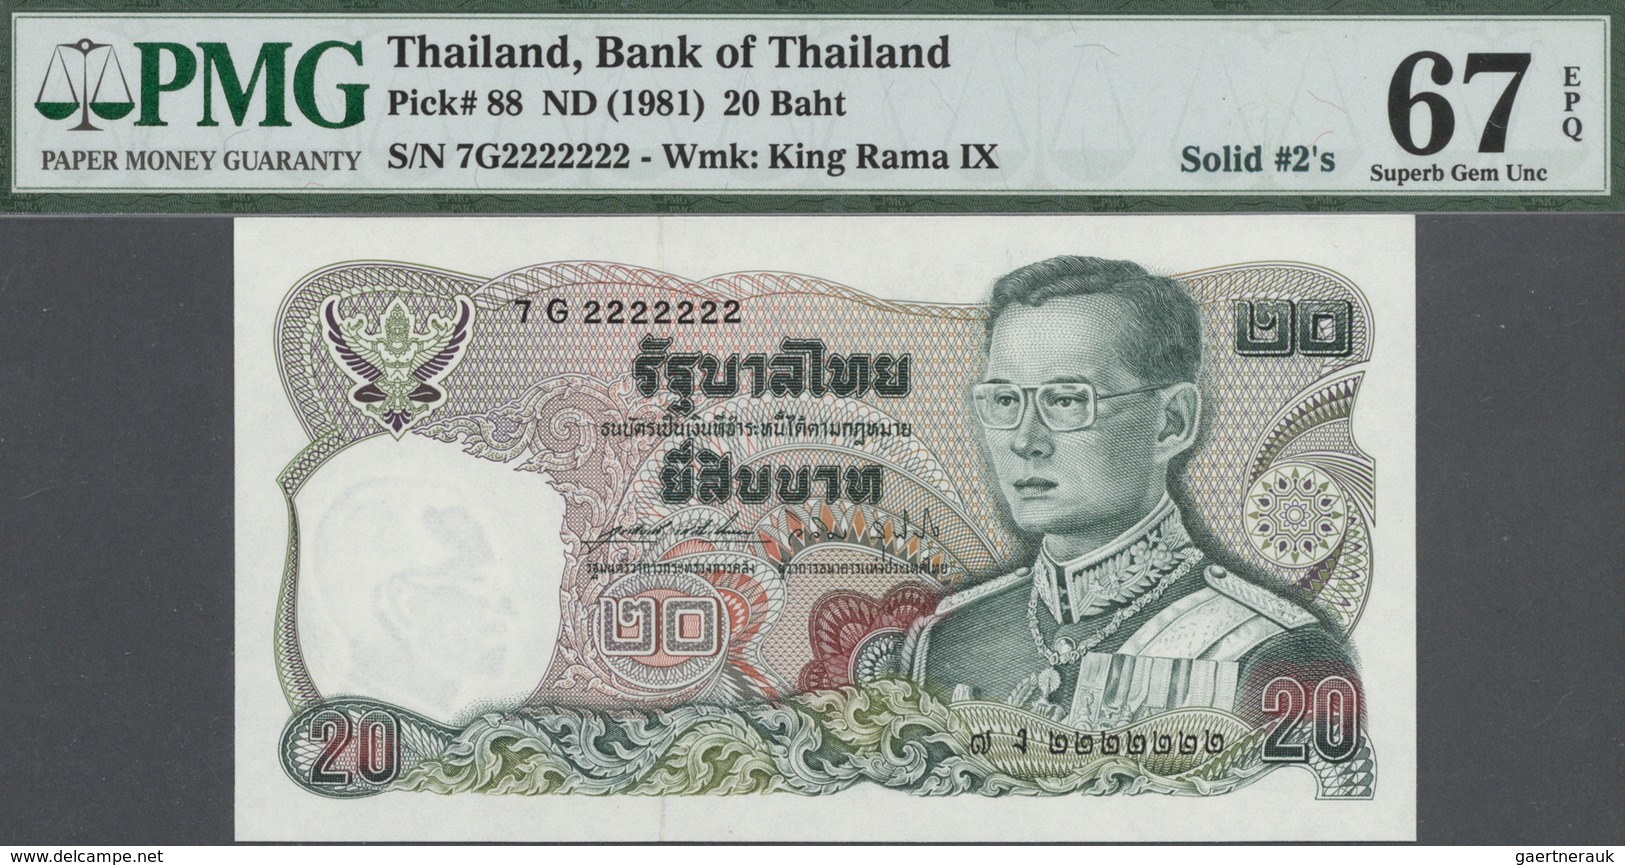 Thailand: set of 9 notes 20 Baht ND(1981) P. 88 with special serial numbers containing: 5G3333333, 7